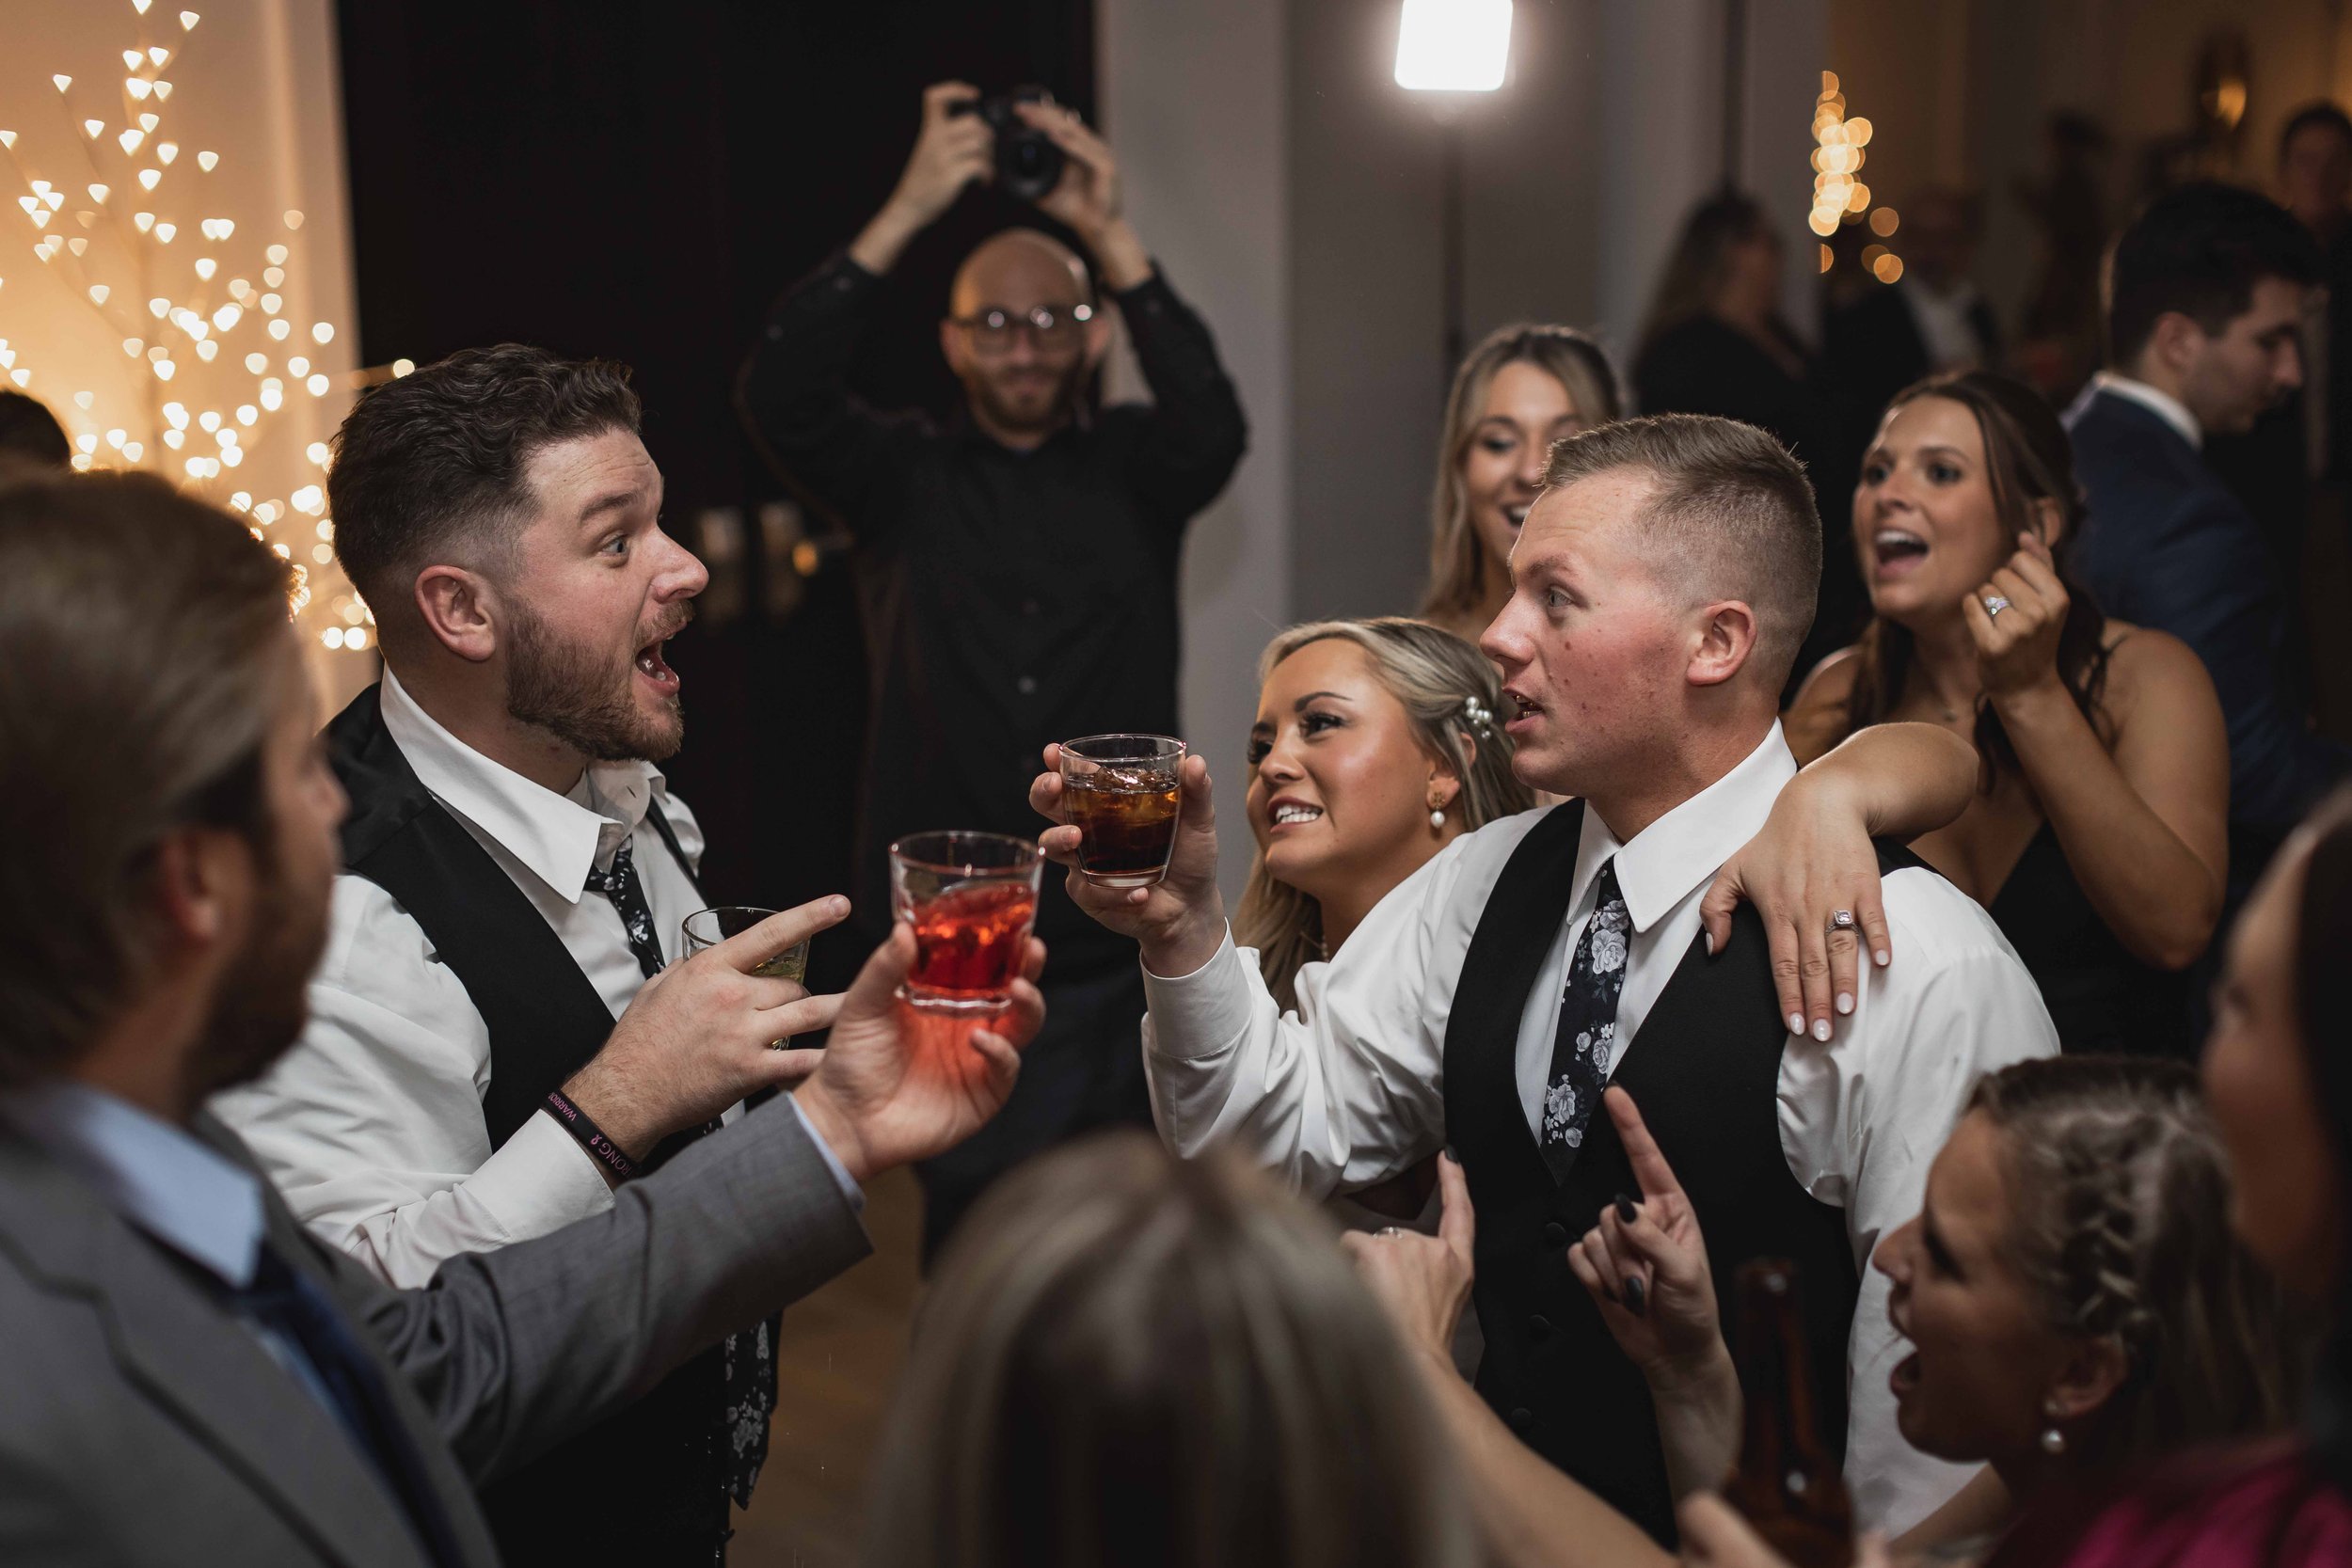 Bride and groom dancing with wedding party.jpg